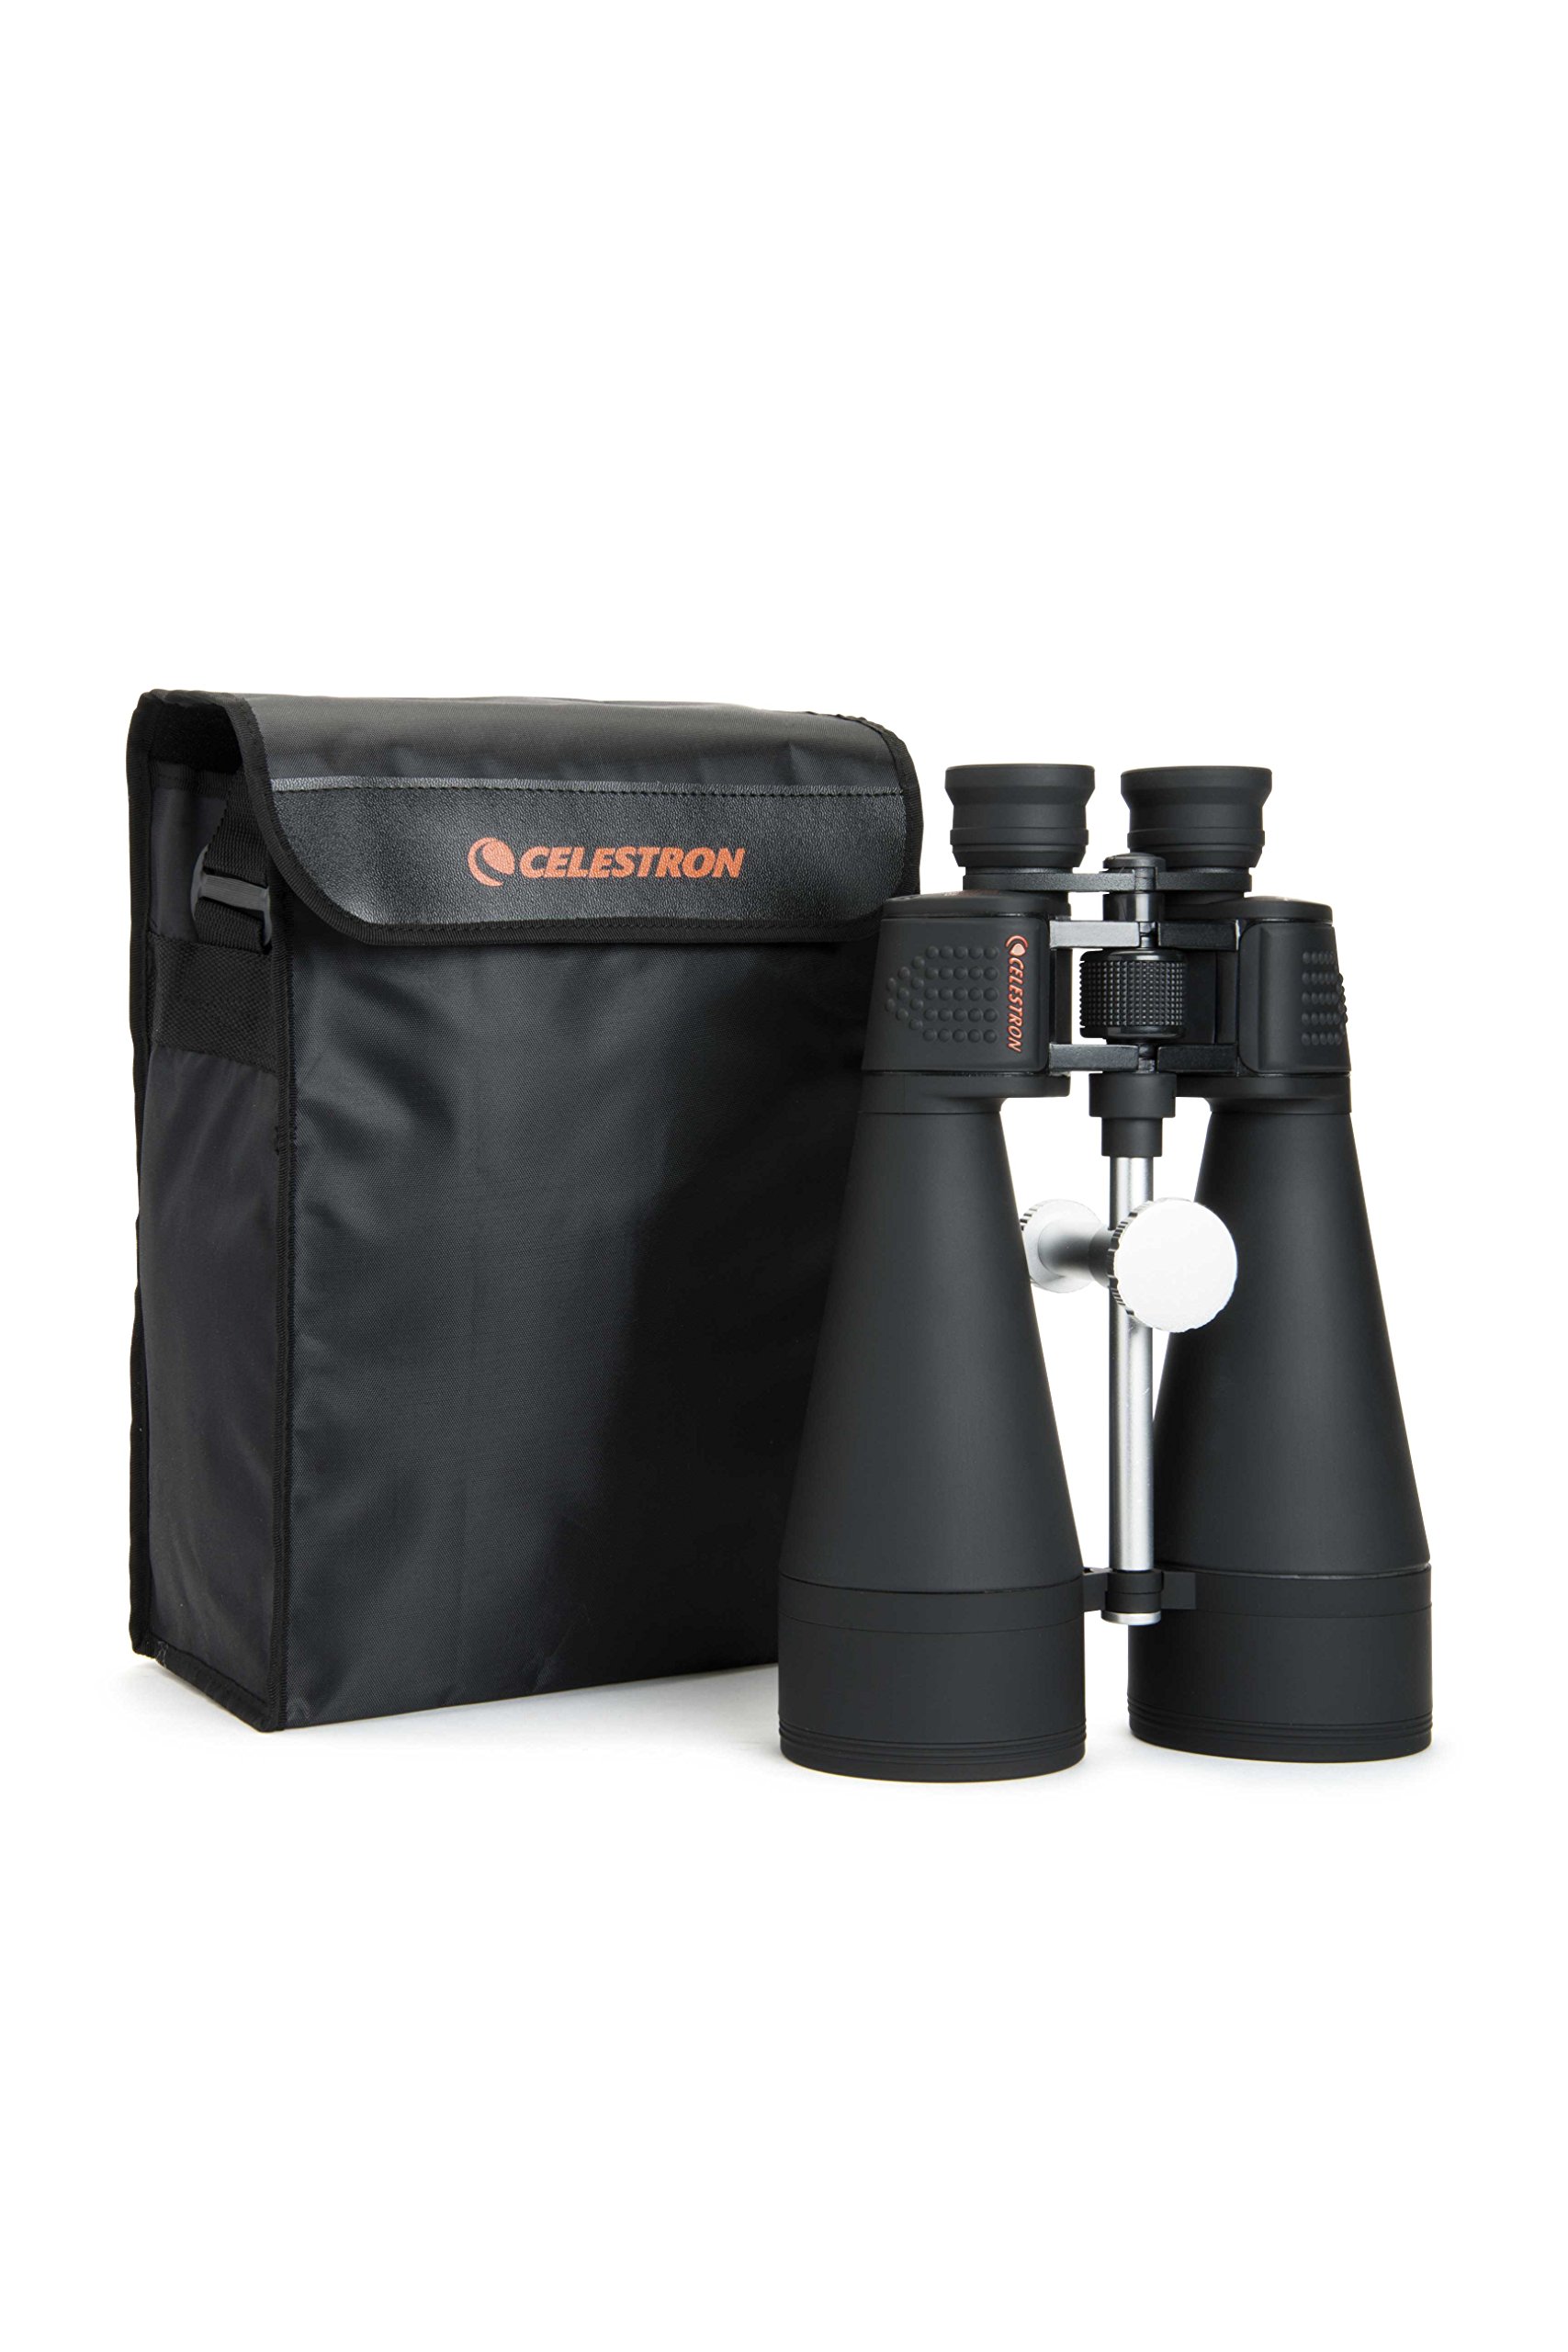 Celestron – SkyMaster 20X80 Binocular – Outdoor and Astronomy Binocular – Large Aperture for Long Distance Viewing – Multi-coated Optics – Carrying Case Included – Ultra Sharp